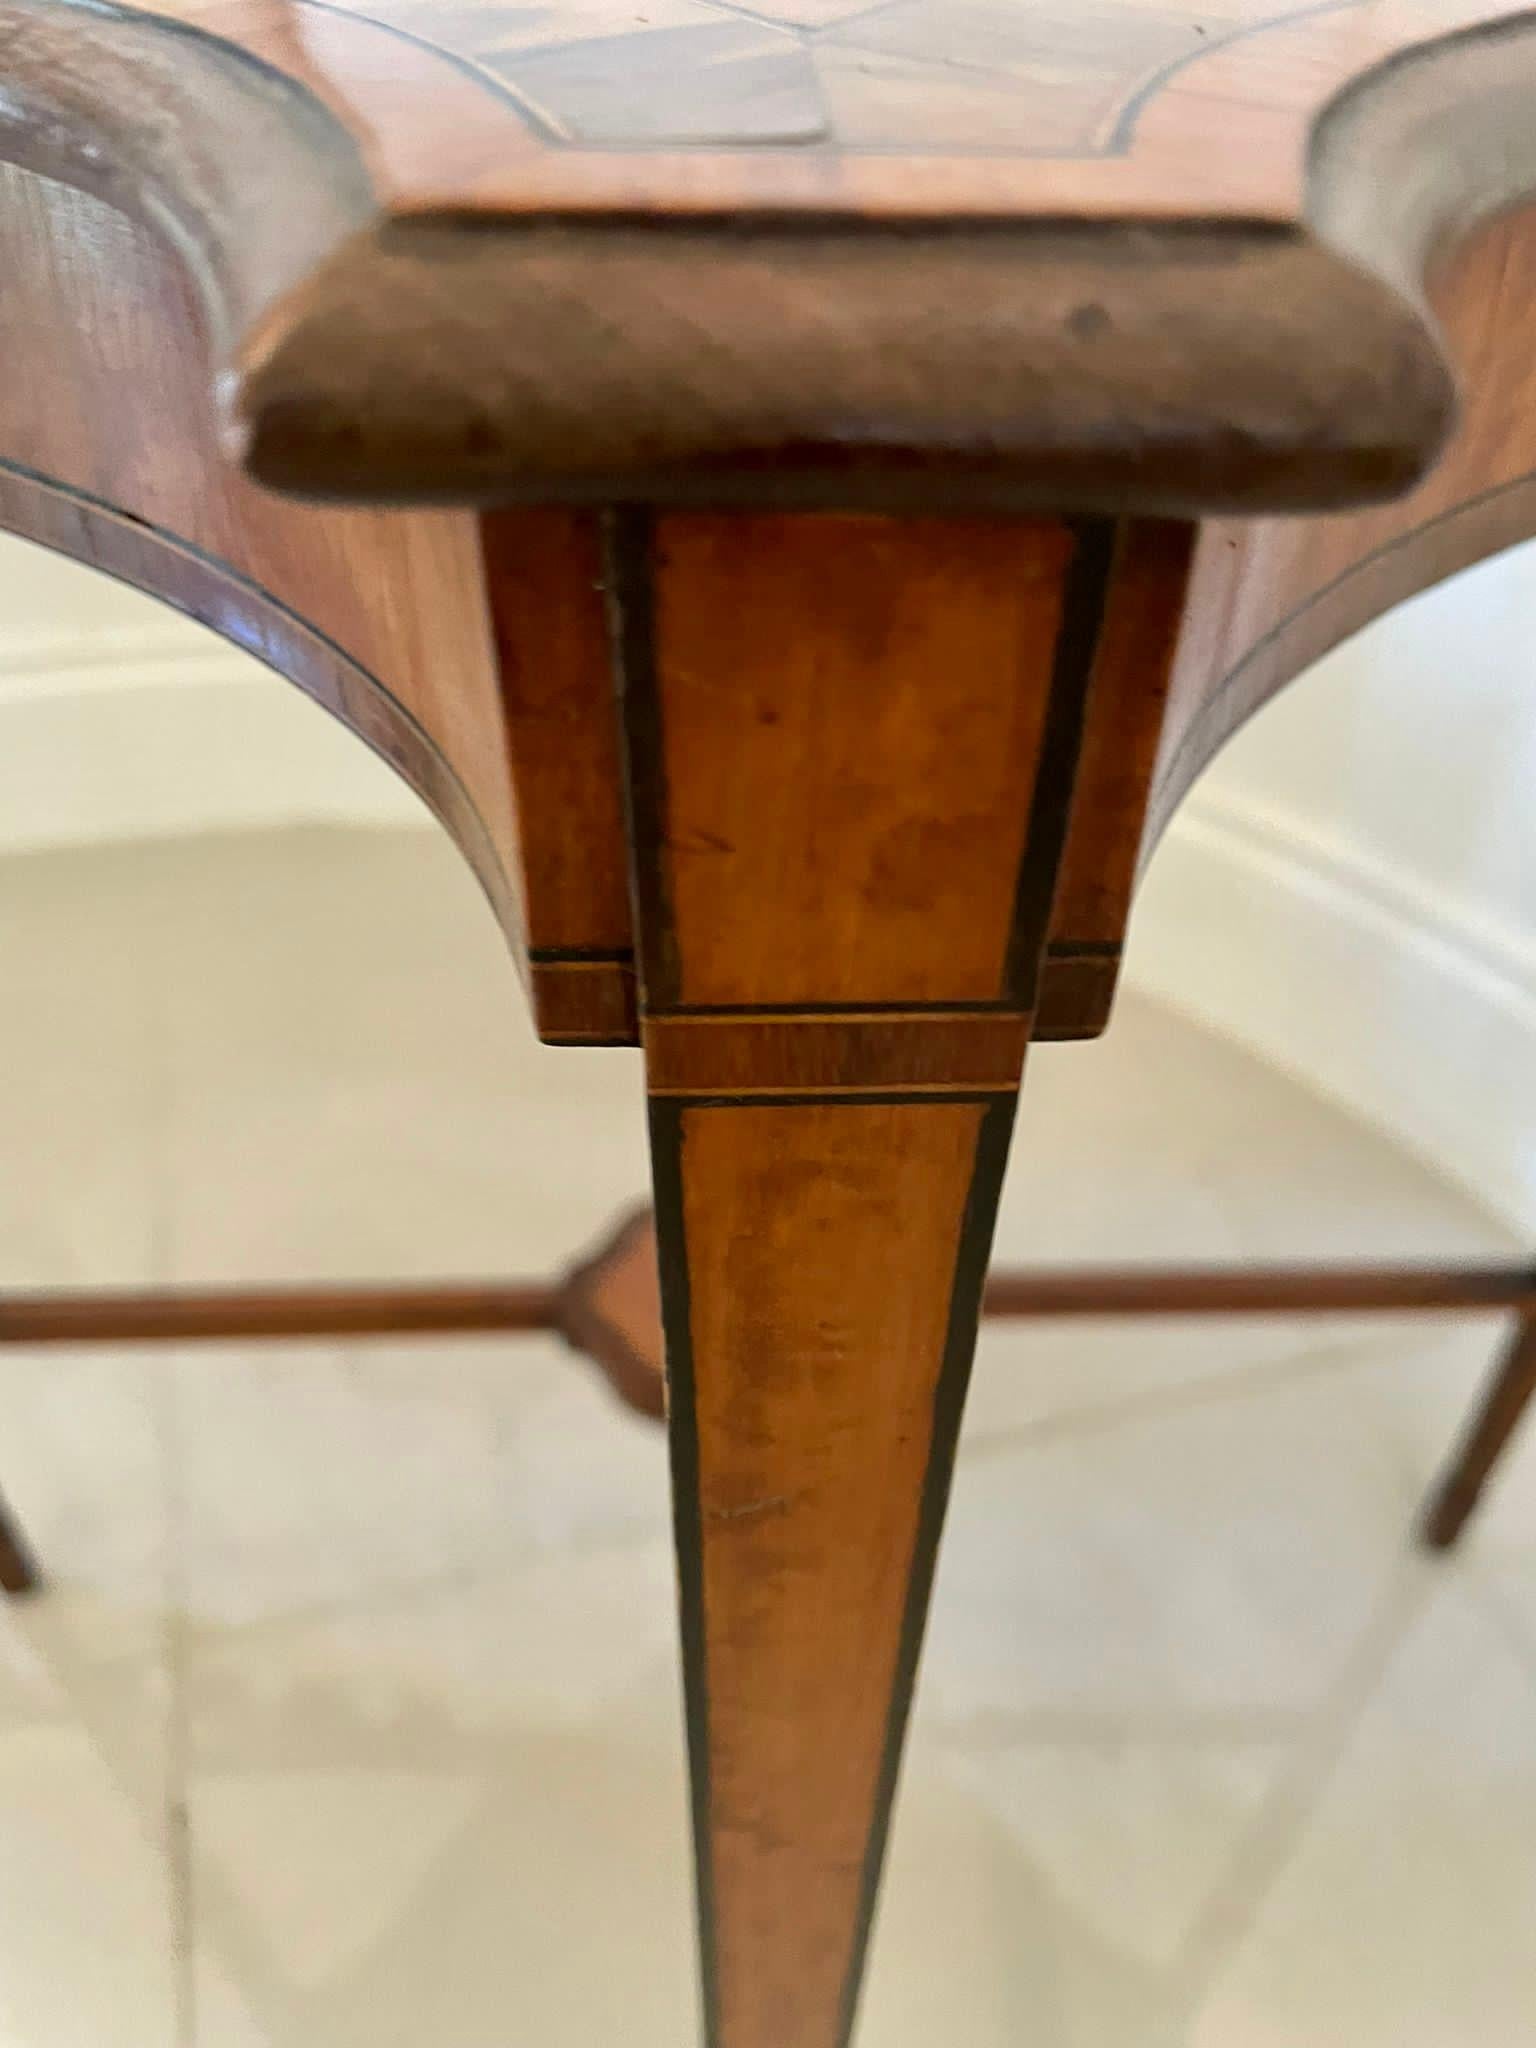 Fine quality antique Edwardian satinwood inlaid lamp table by Edwards & Roberts, London having a quality inlaid satinwood serpentine shaped top with pretty rosewood crossbanding, serpentine shaped frieze standing on beautiful elegant inlaid